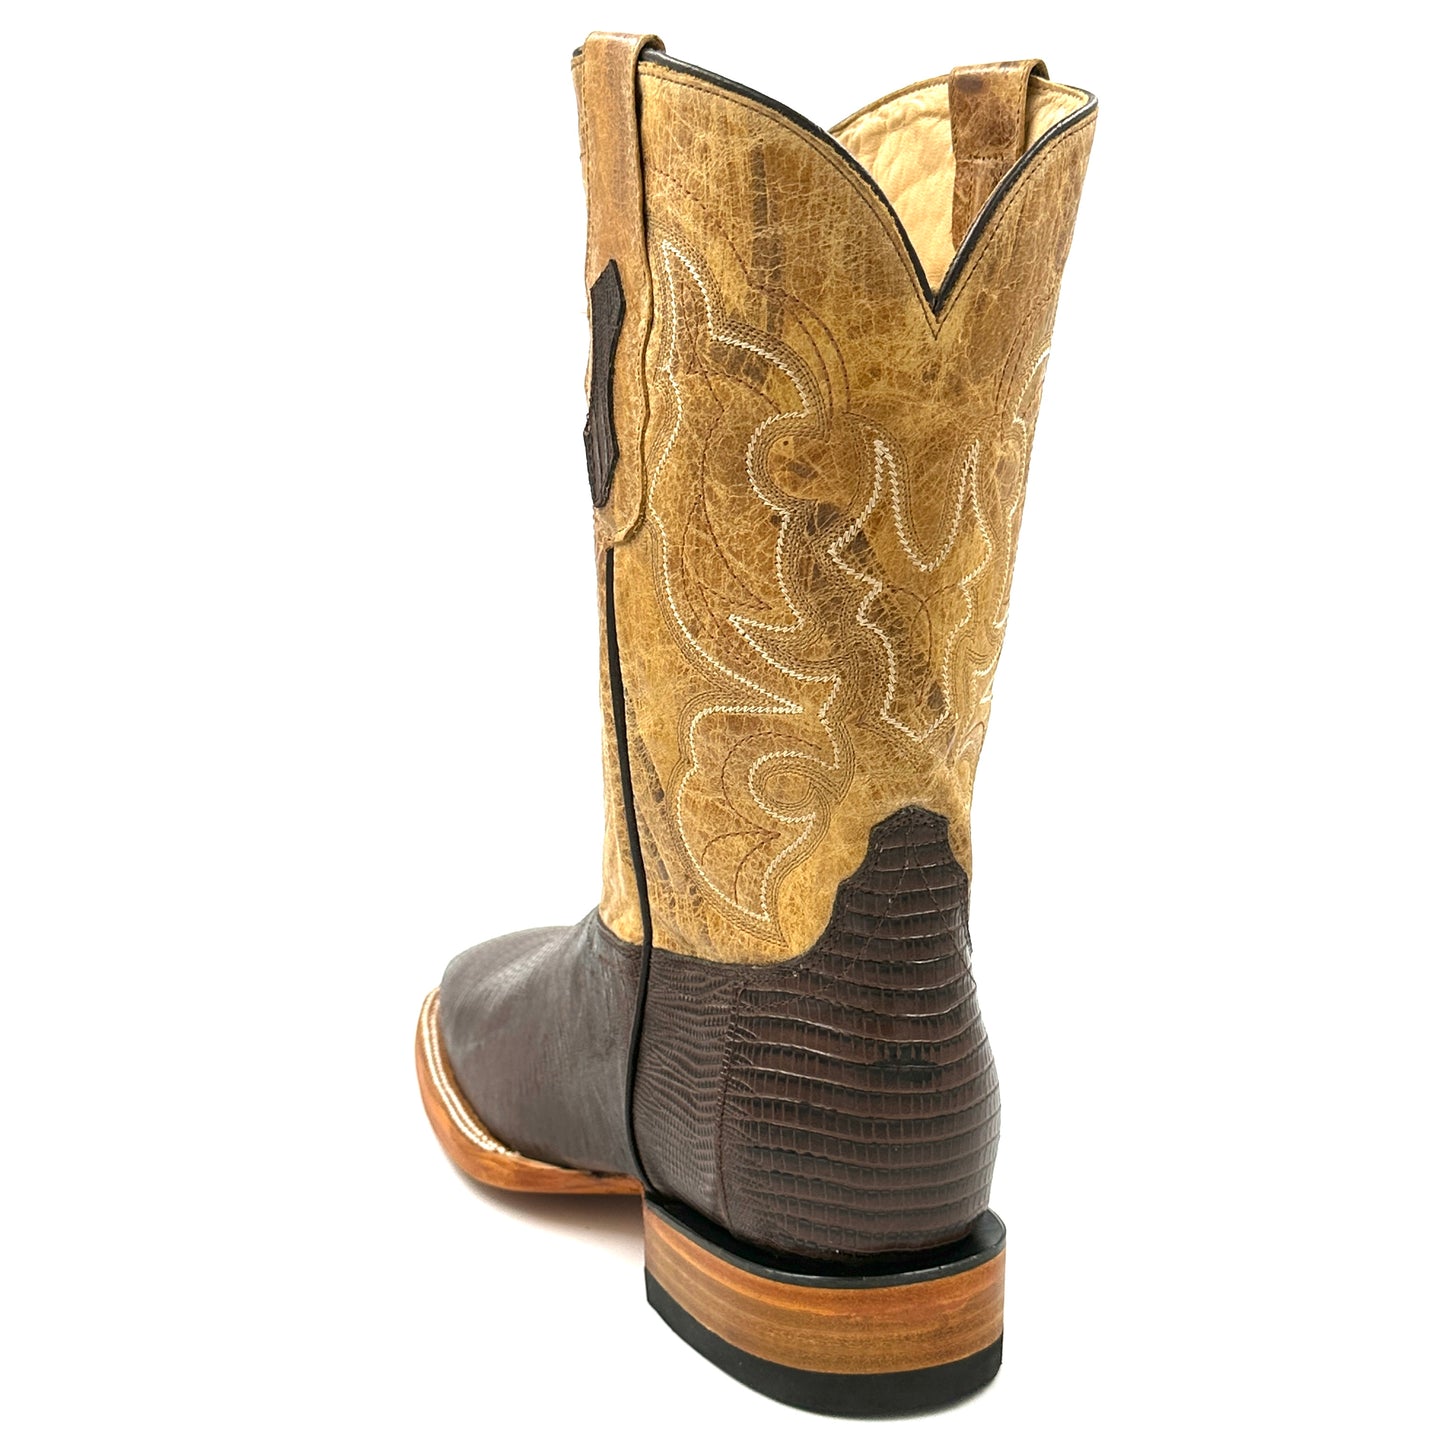 Imitation Lizard Brown Wide Square Boot